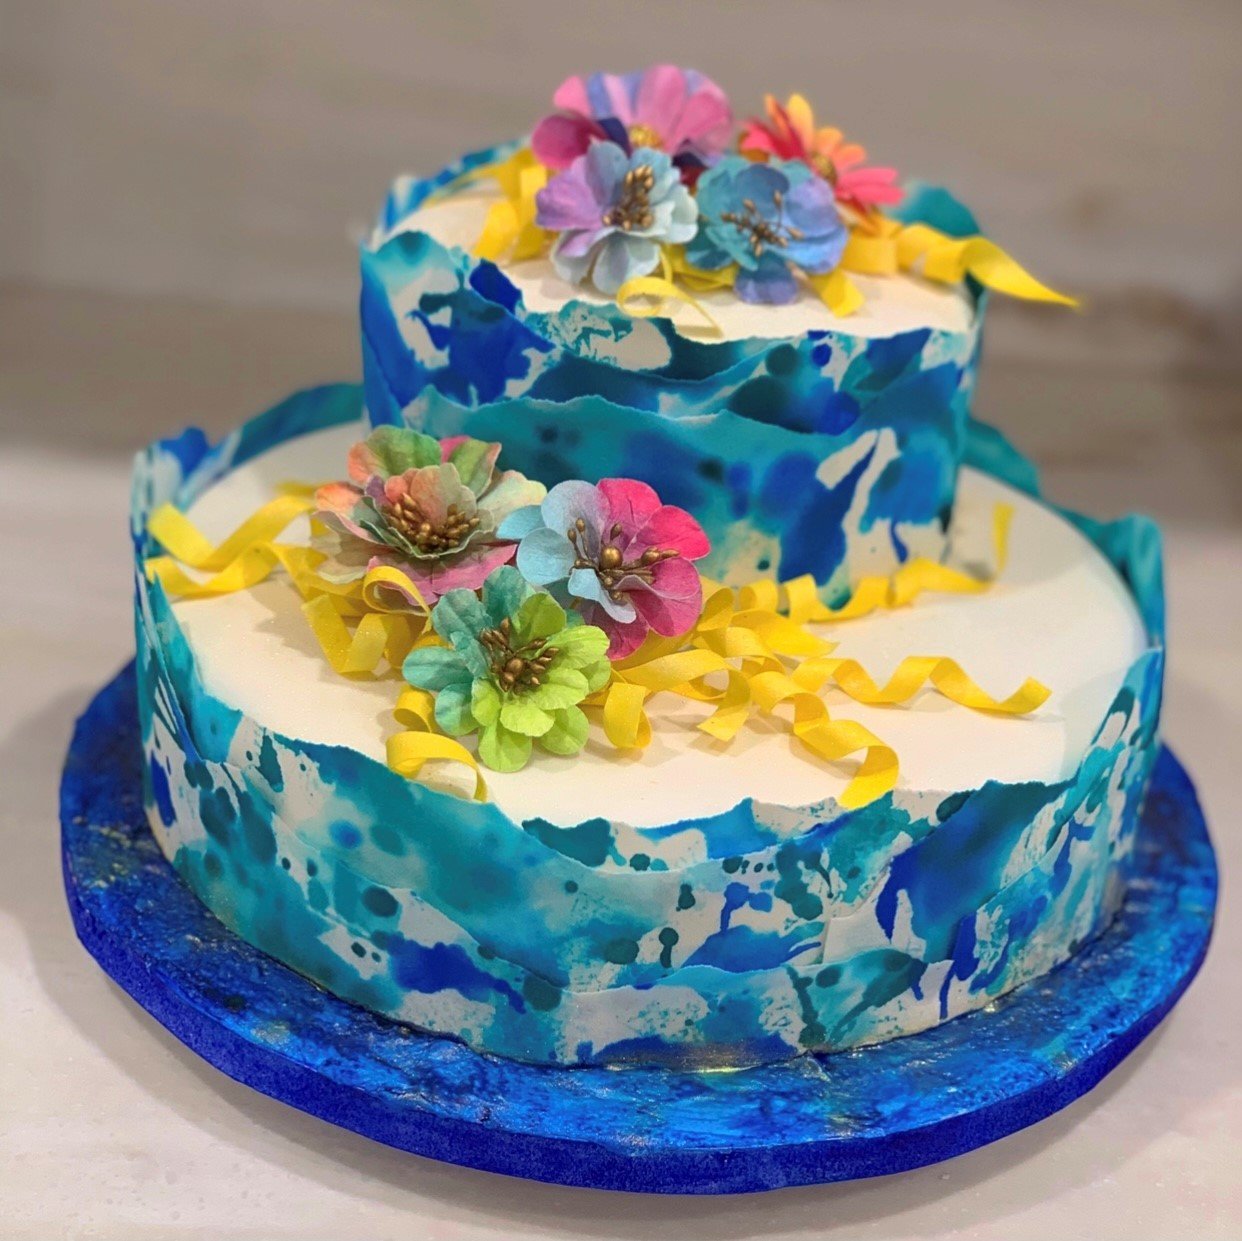 Even though sapphire is associated with the month of September, join Kim in making a springtime sapphire cake this month.